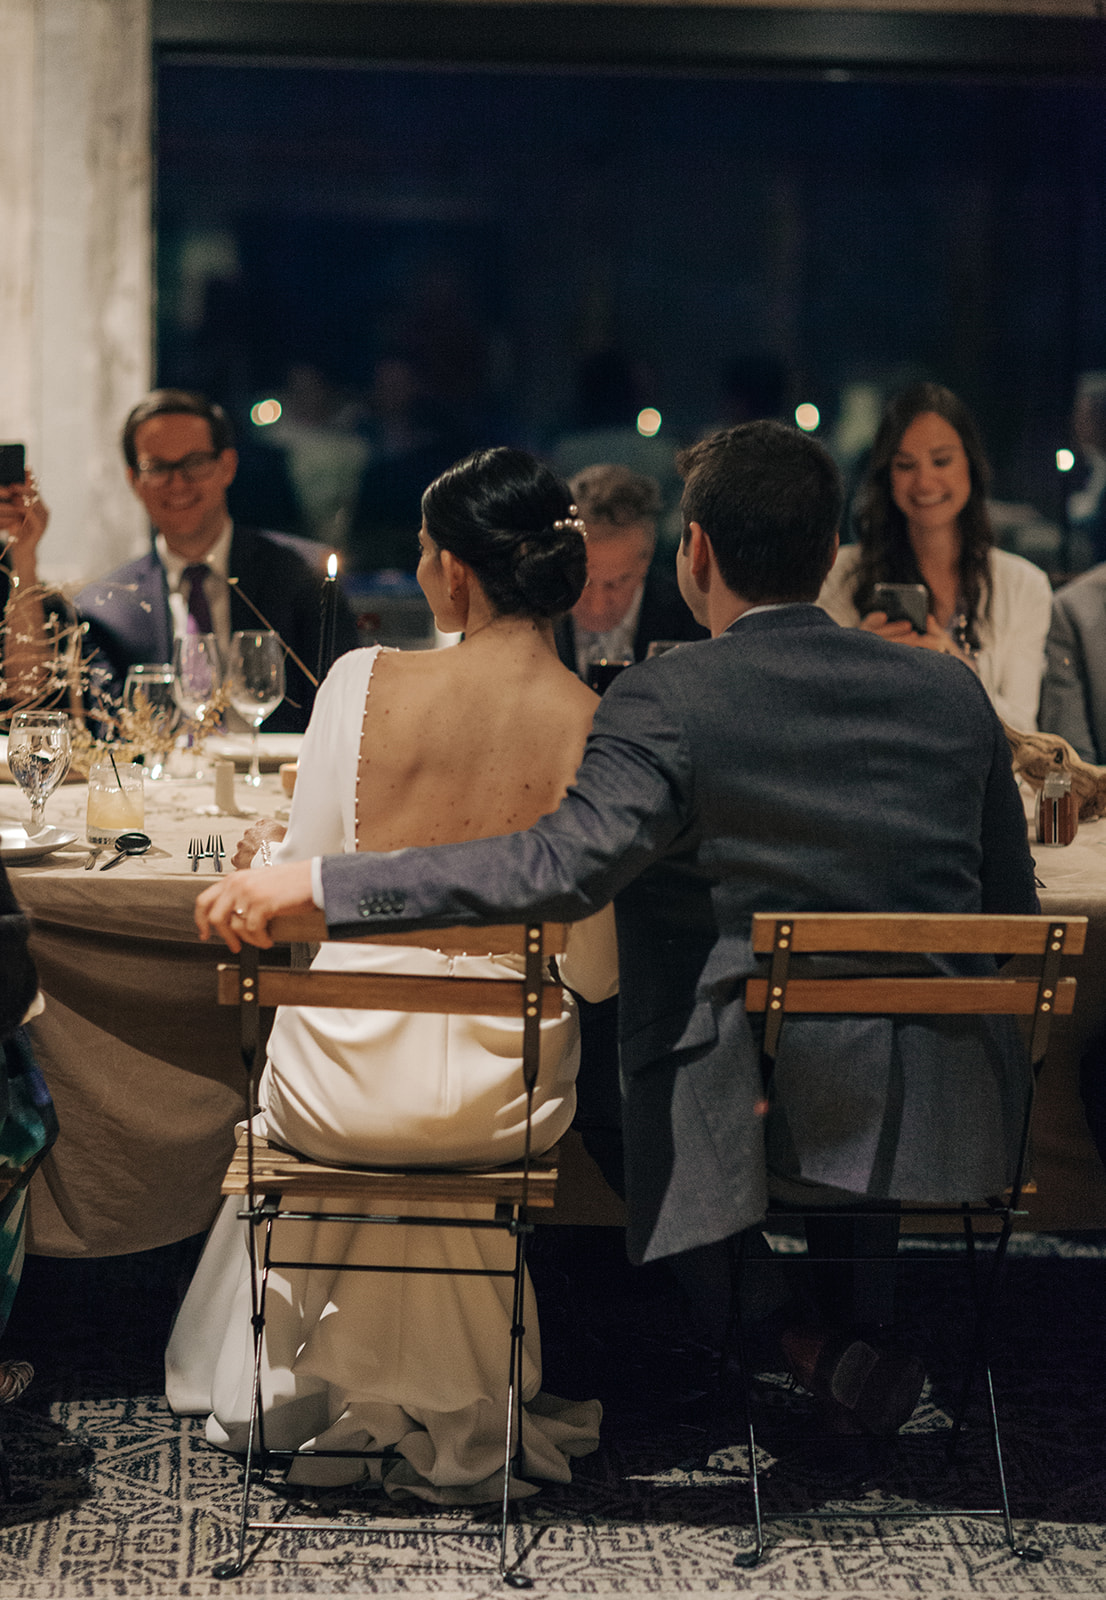 bride and groom enjoying dinner with their guests at their intimate wedding reception